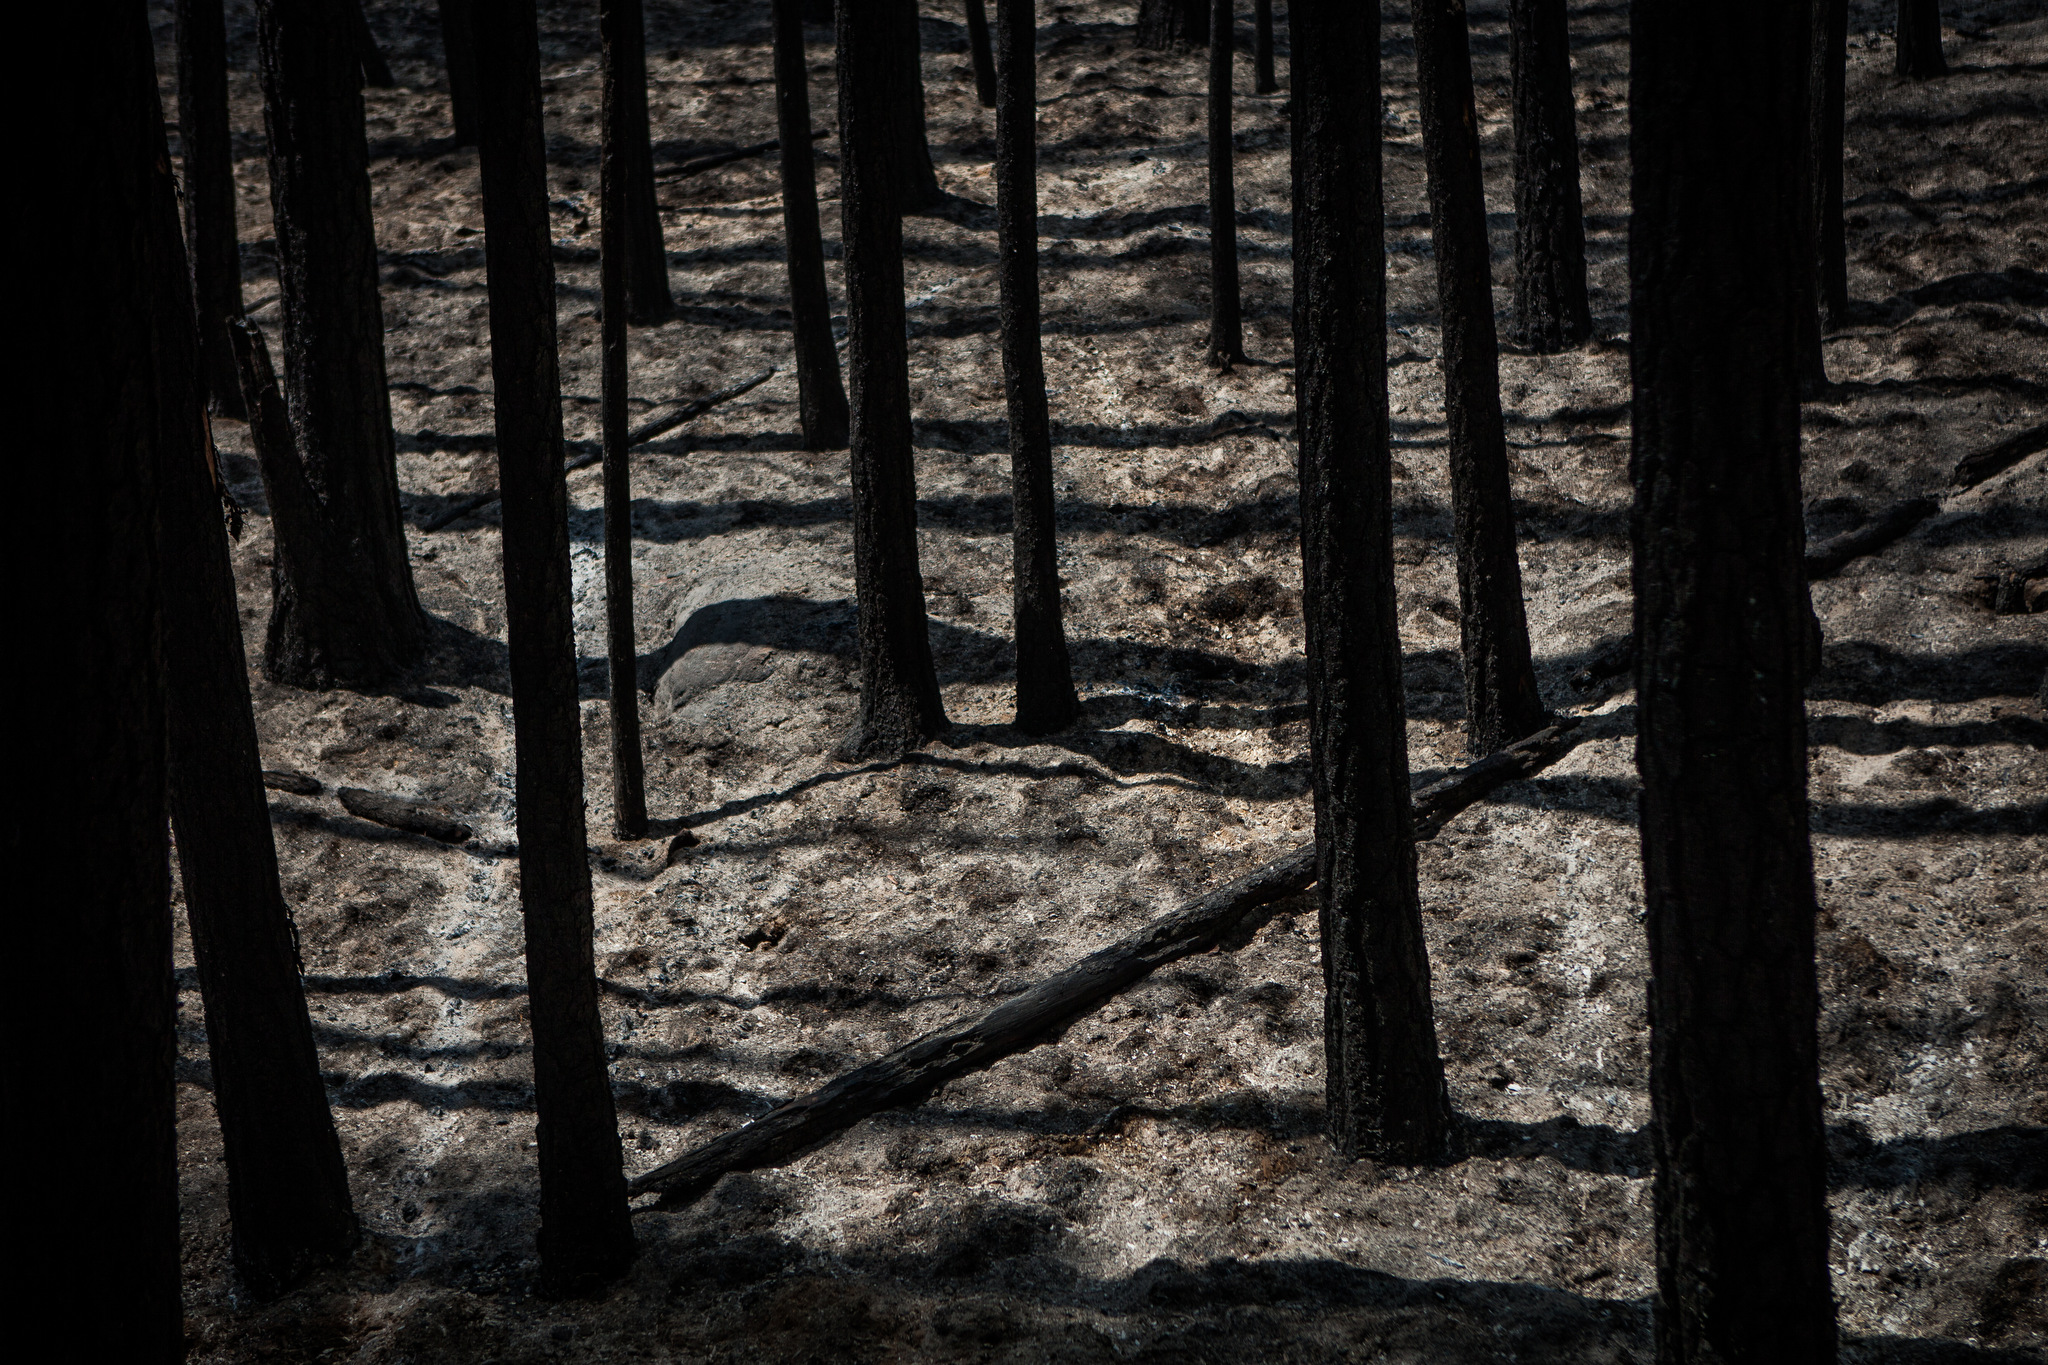  The remains of a forest burned by the Rim Fire just outside Yosemite National Park, California, August 24, 2013. The Rim Fire burned 257,314 acres and is the third largest wildfire in California history. 